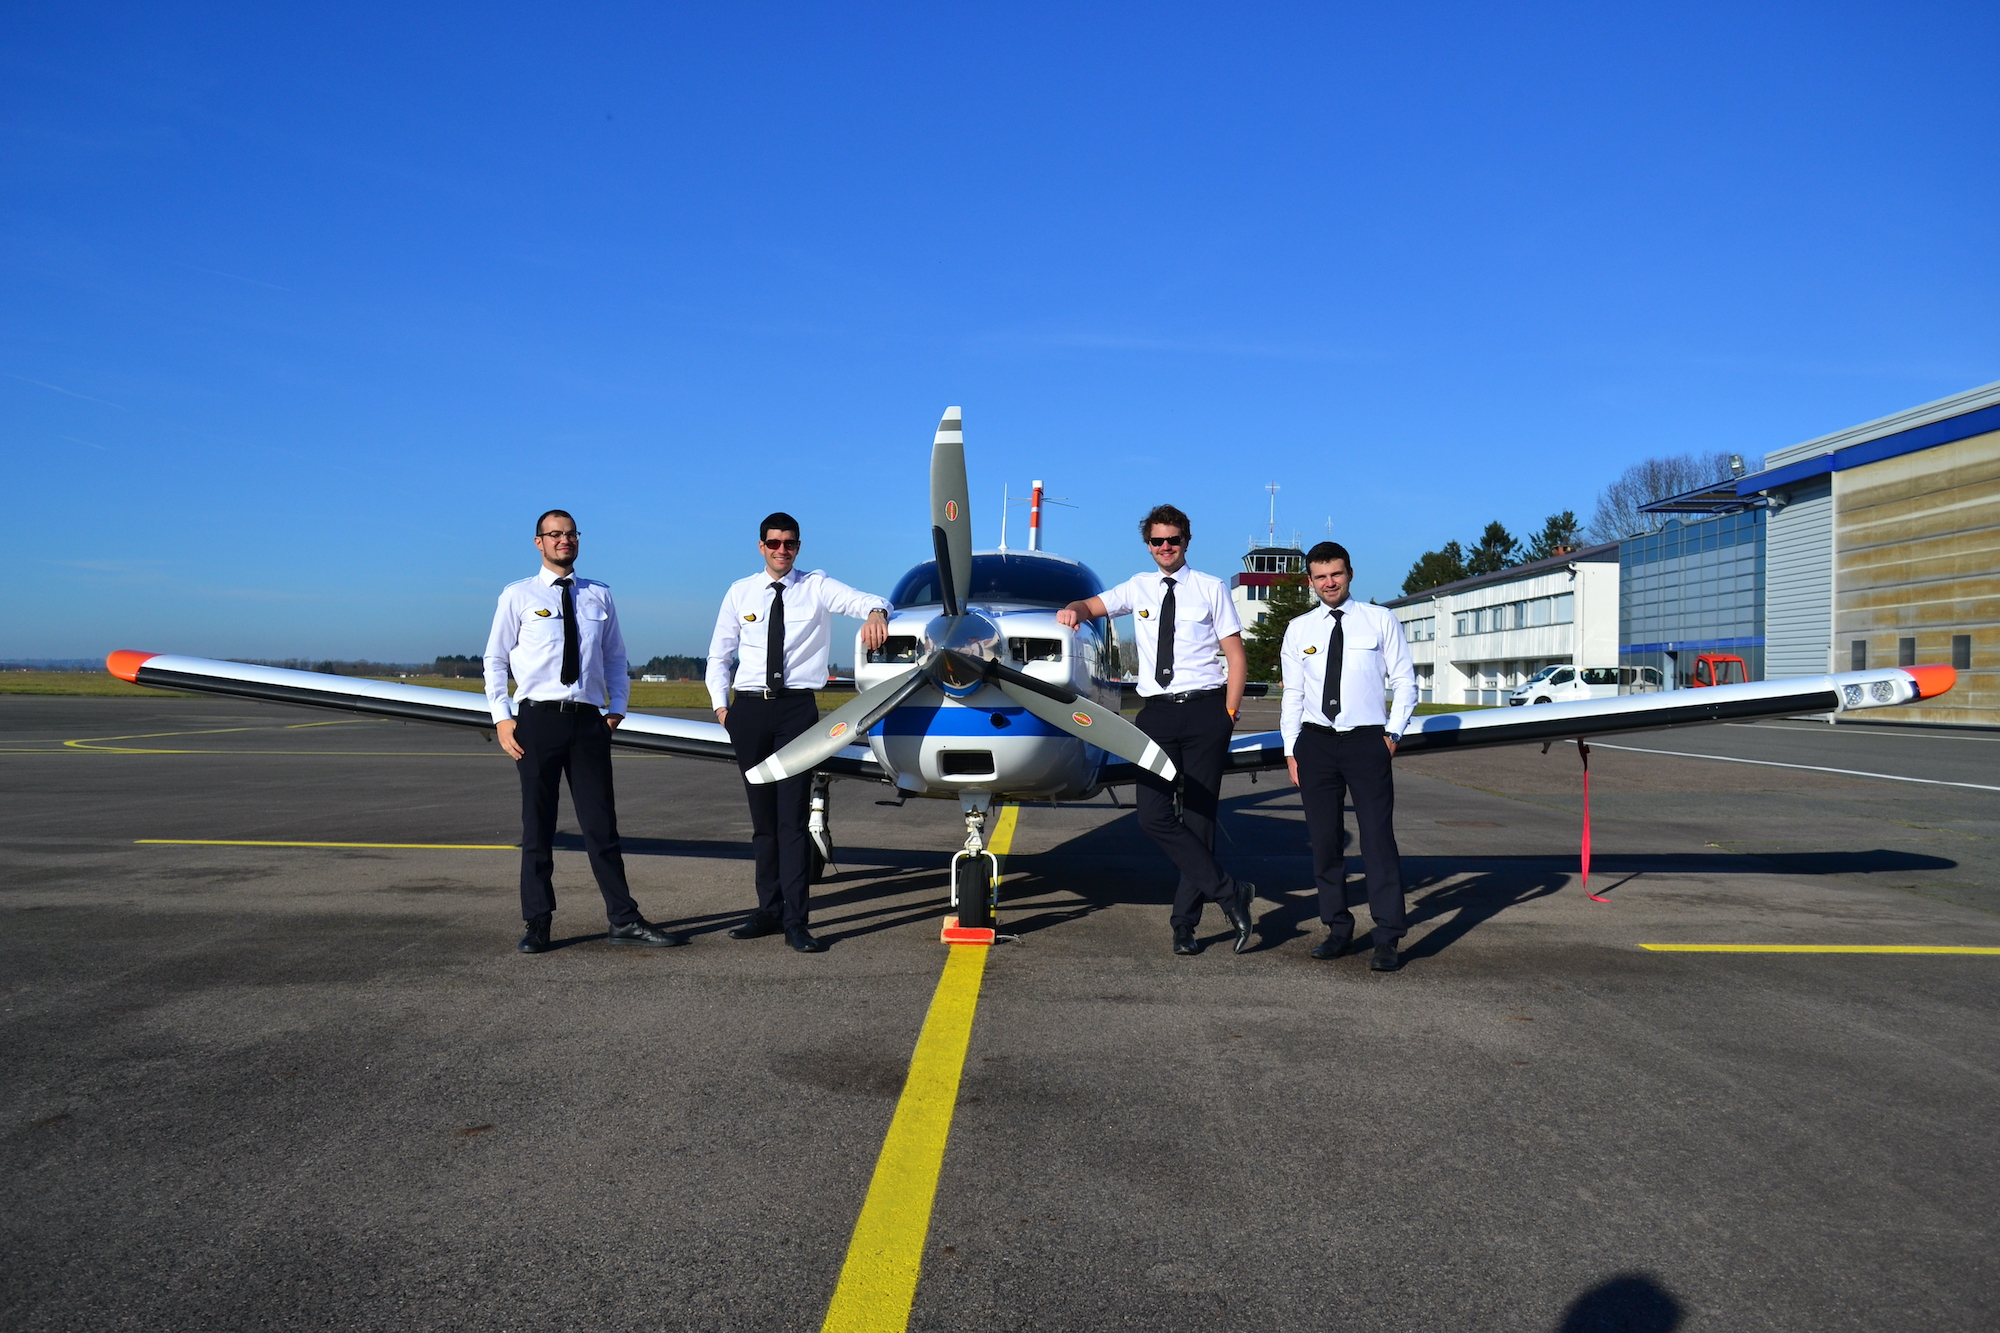 An EPL flight group posing next to their TB20 seen from the front